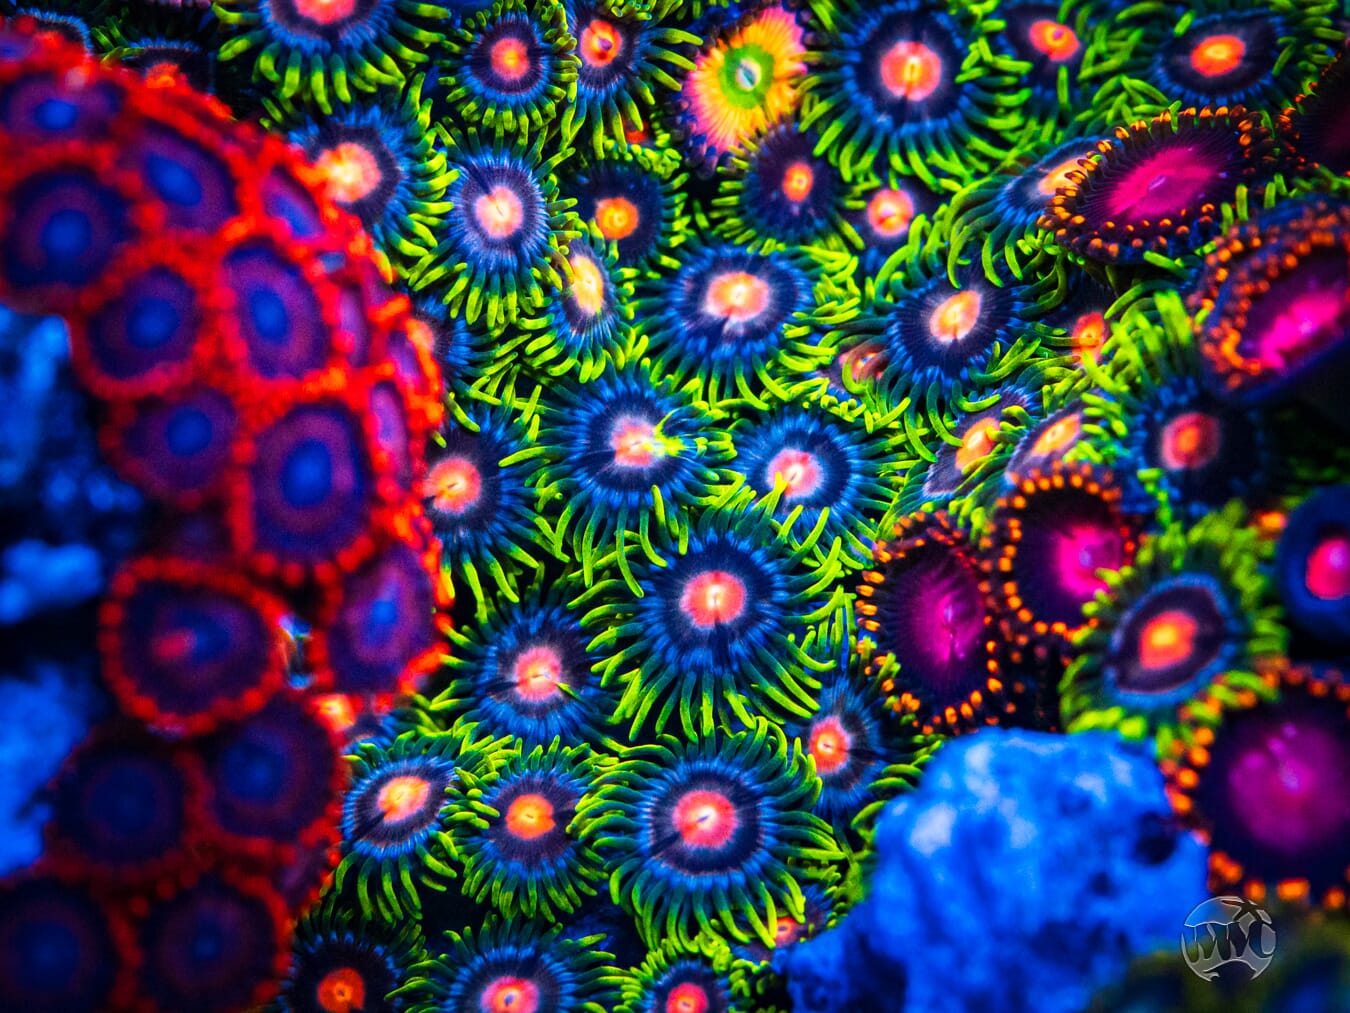 WWC Sweet Tooth Zoanthids